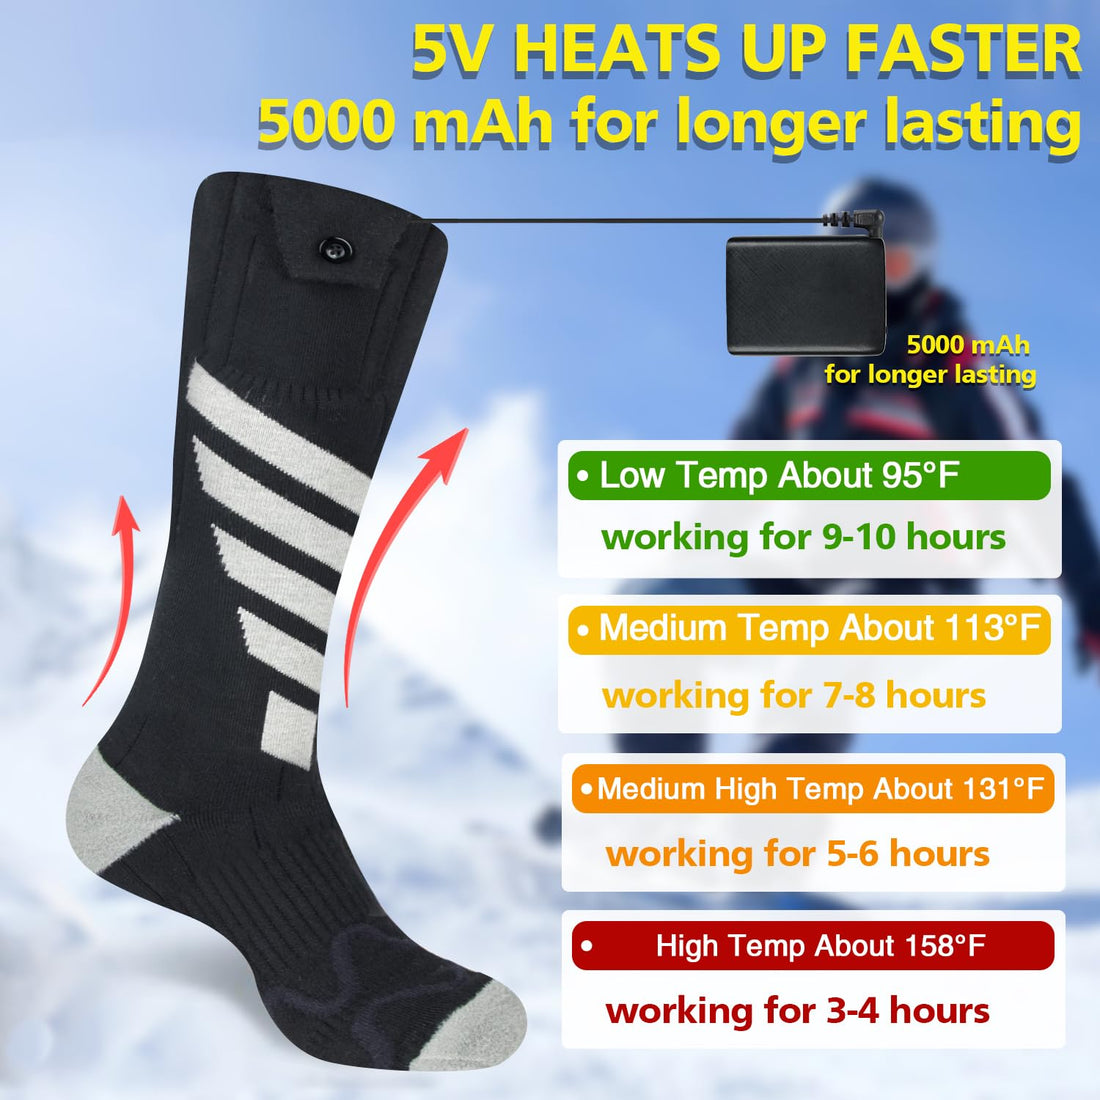 Rechargeable Electric Socks, Unisex Battery Powered Battery Socks Winter Warm Thermo Heating Socks